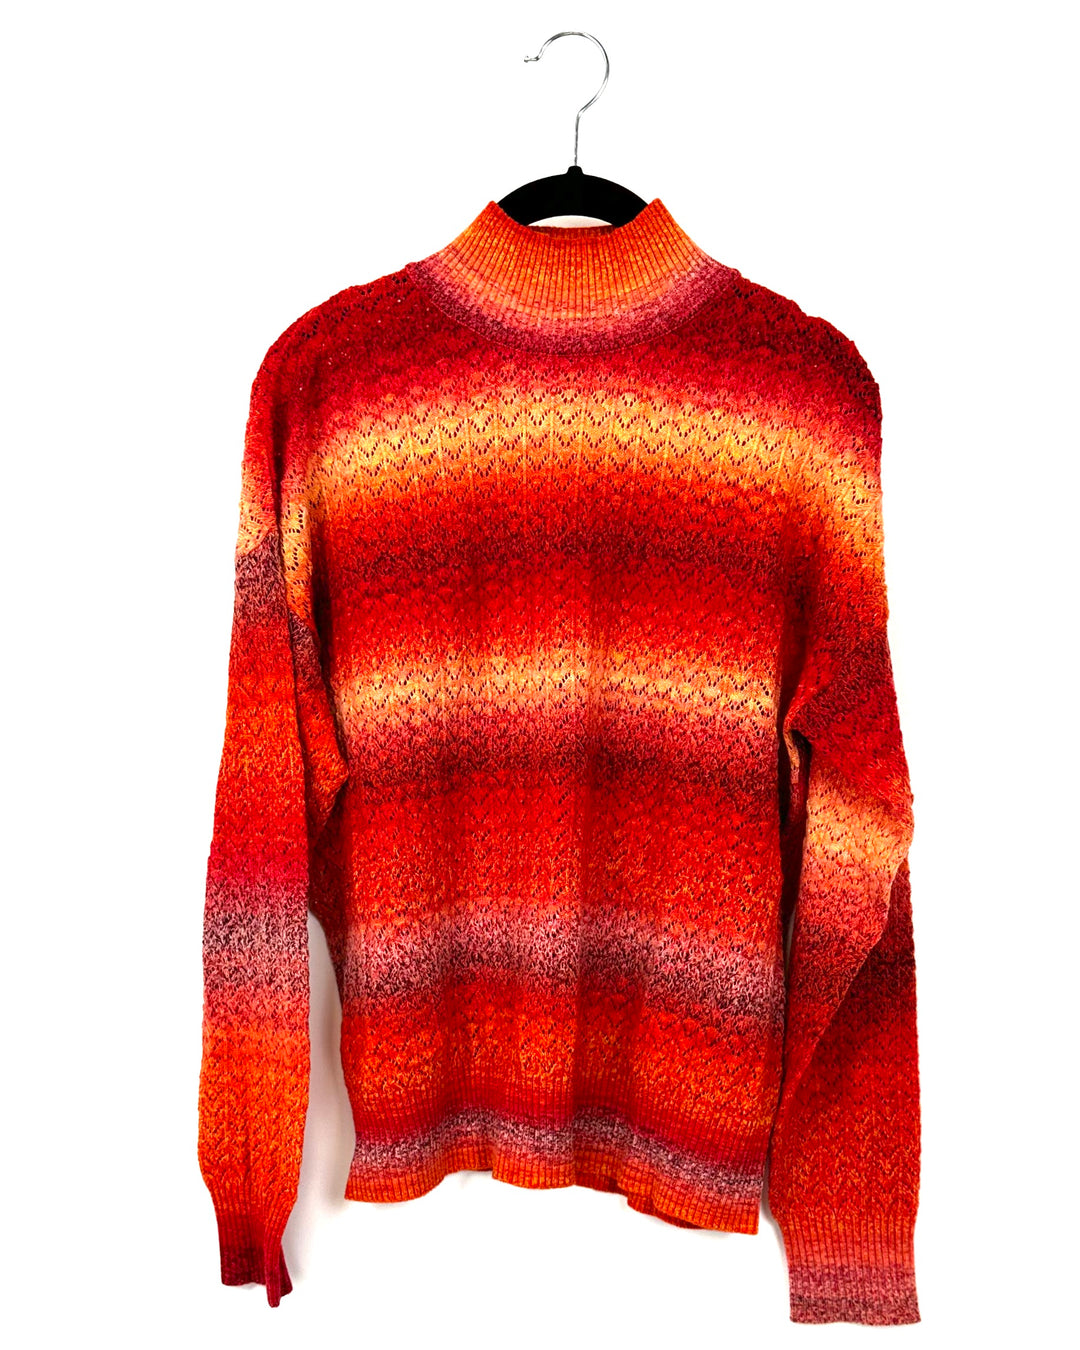 Red Gradient Knit Turtleneck Sweater - Small